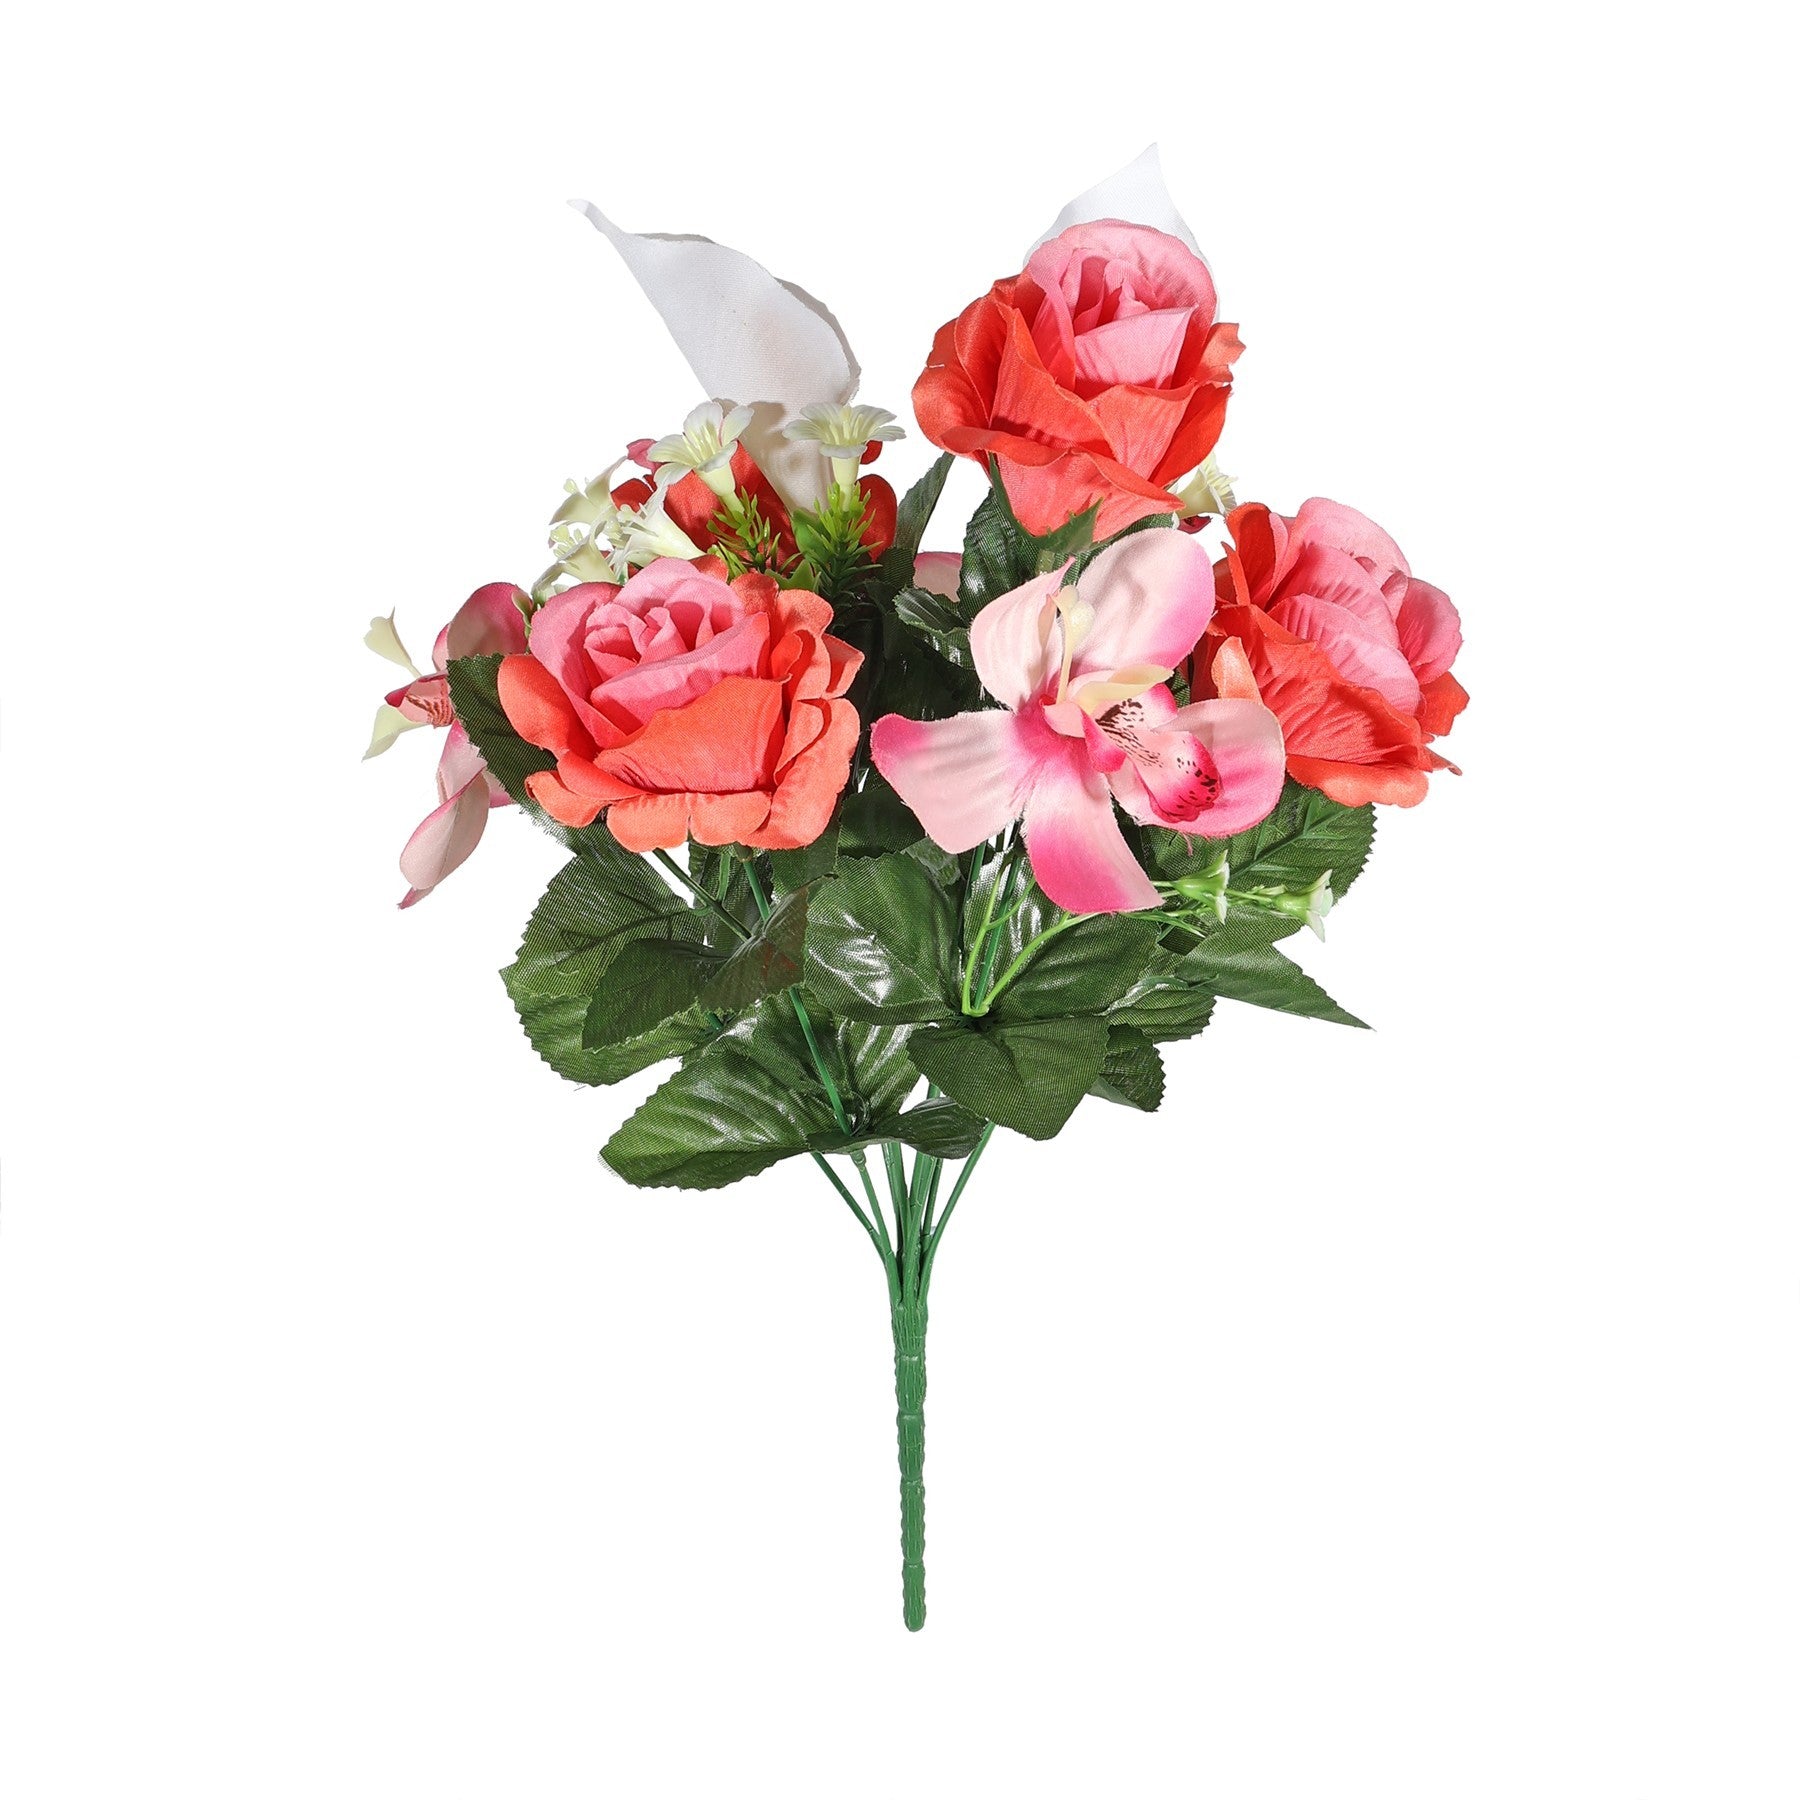 View Pembroke Pink Rose Mixed Bunch information